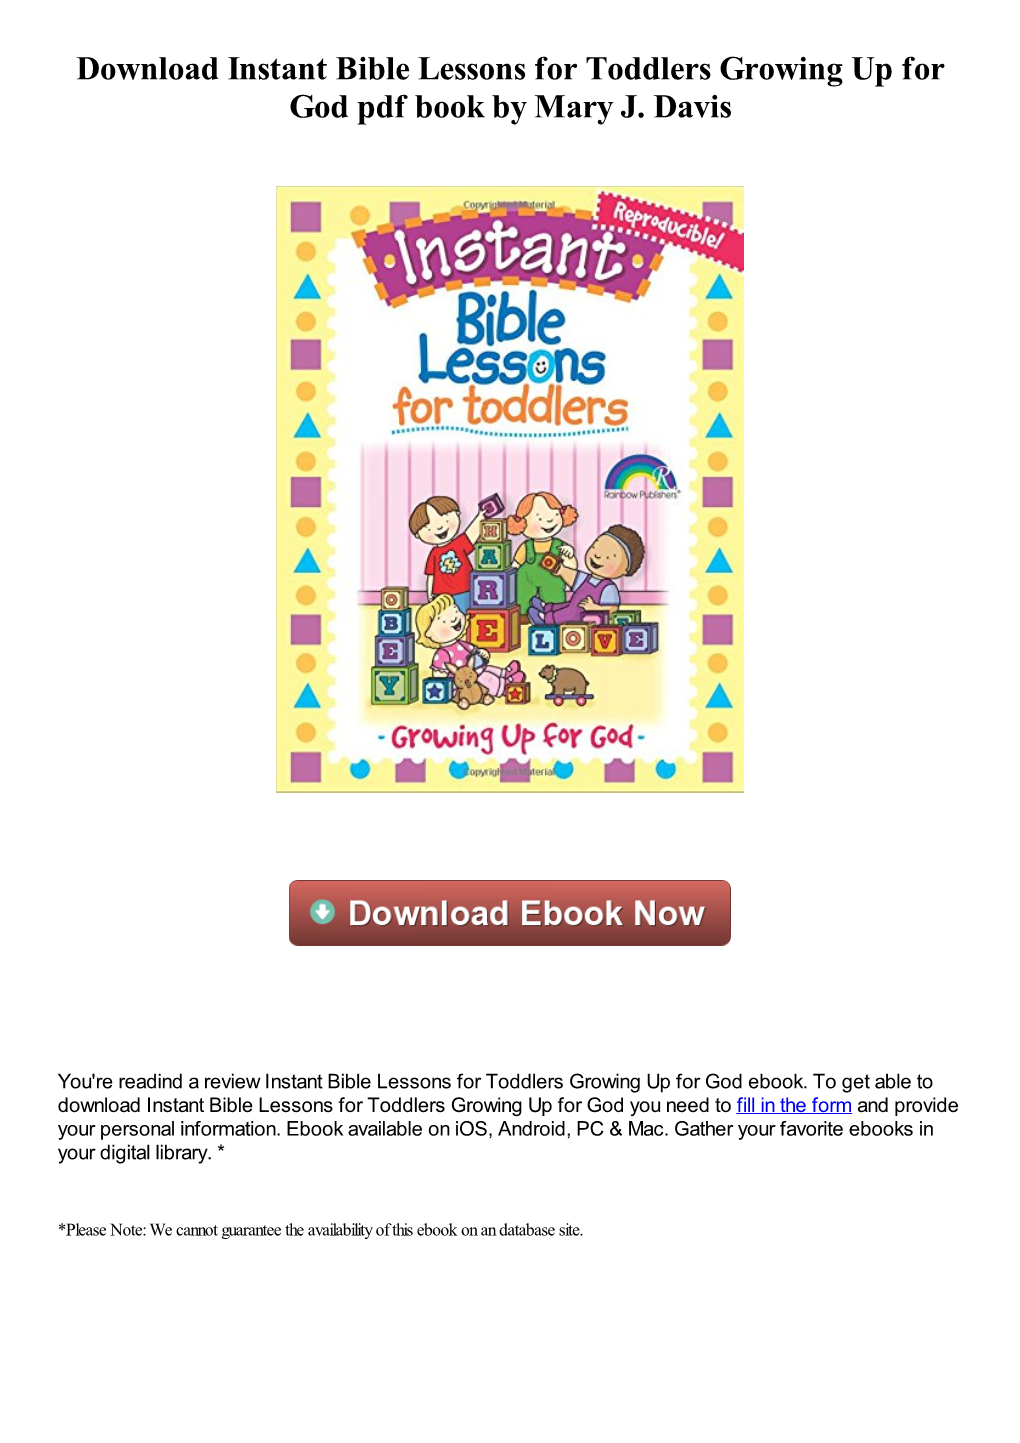 Download Instant Bible Lessons for Toddlers Growing up for God Pdf Book by Mary J